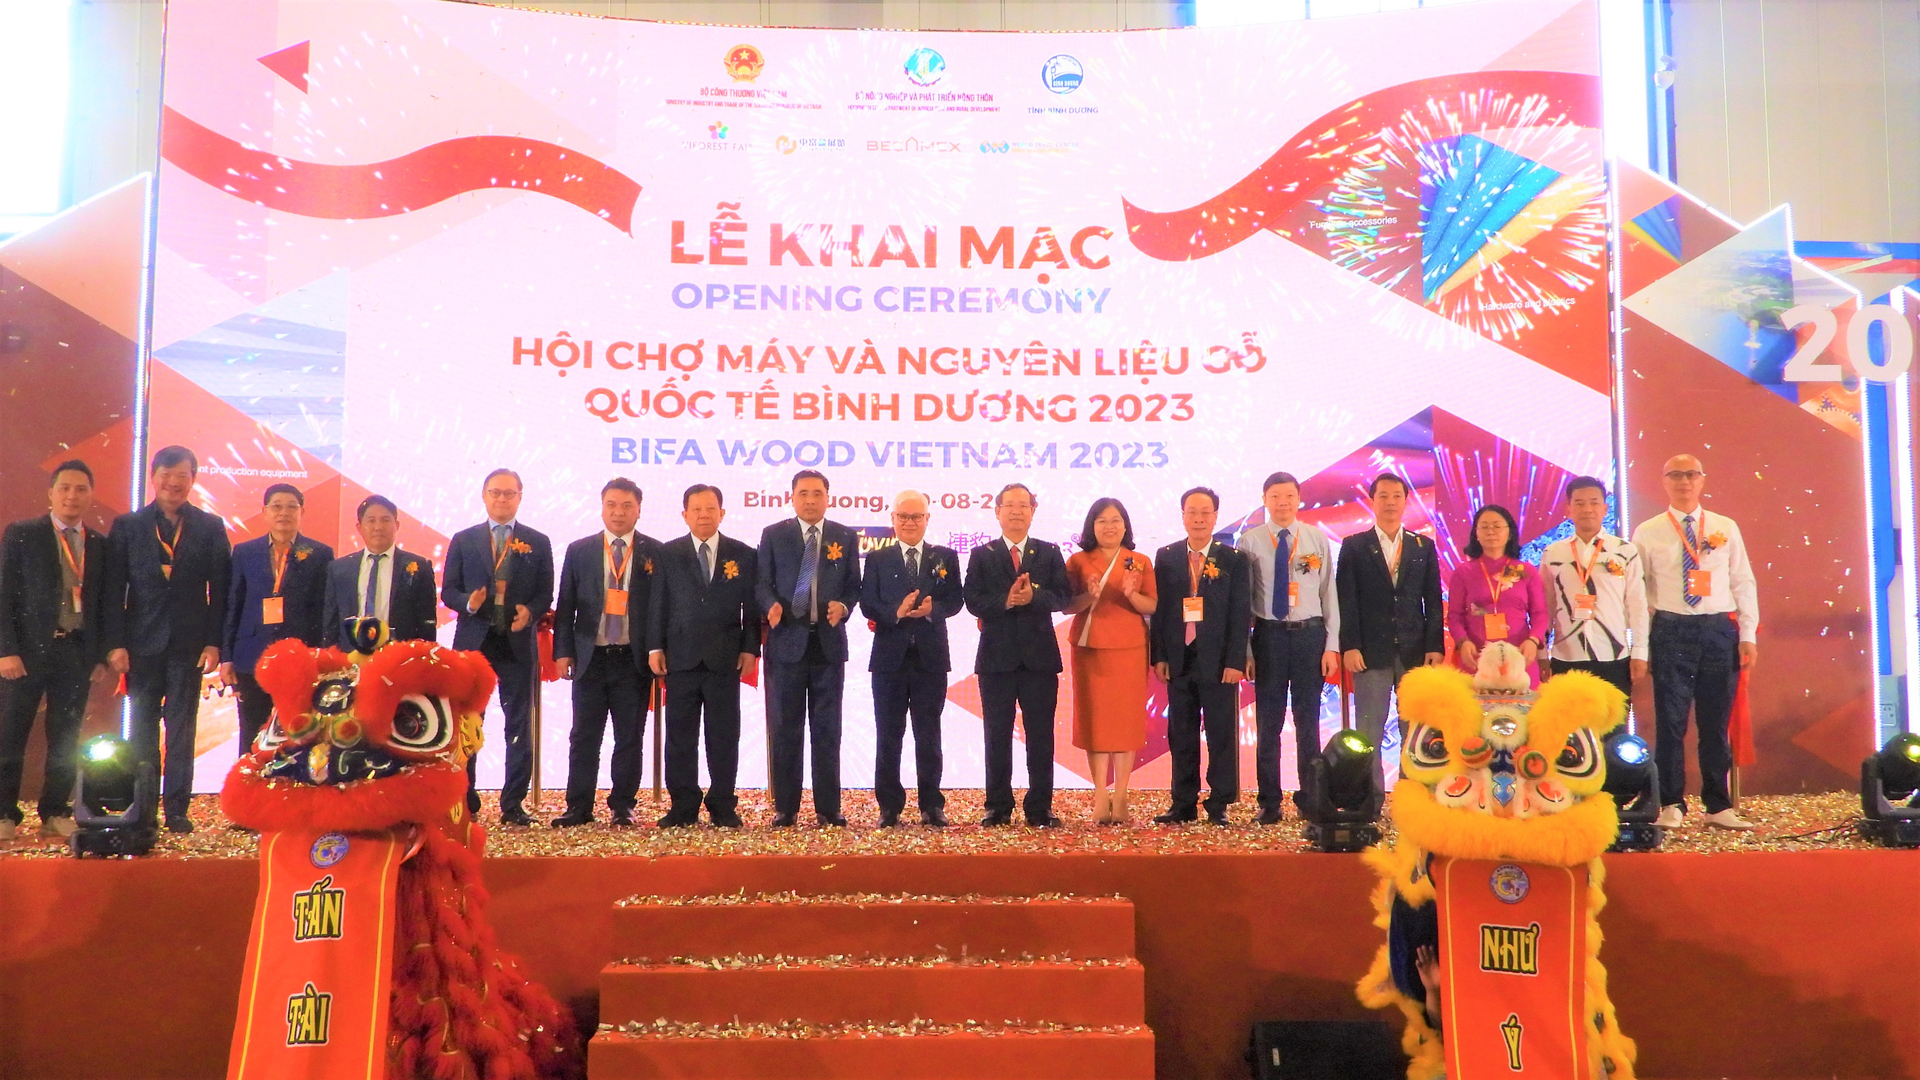 The Binh Duong International Wood, Machinery, and Materials Exhibition - BIFA WOOD VIETNAM 2023 was officially opened. Photo: Tran Trung.